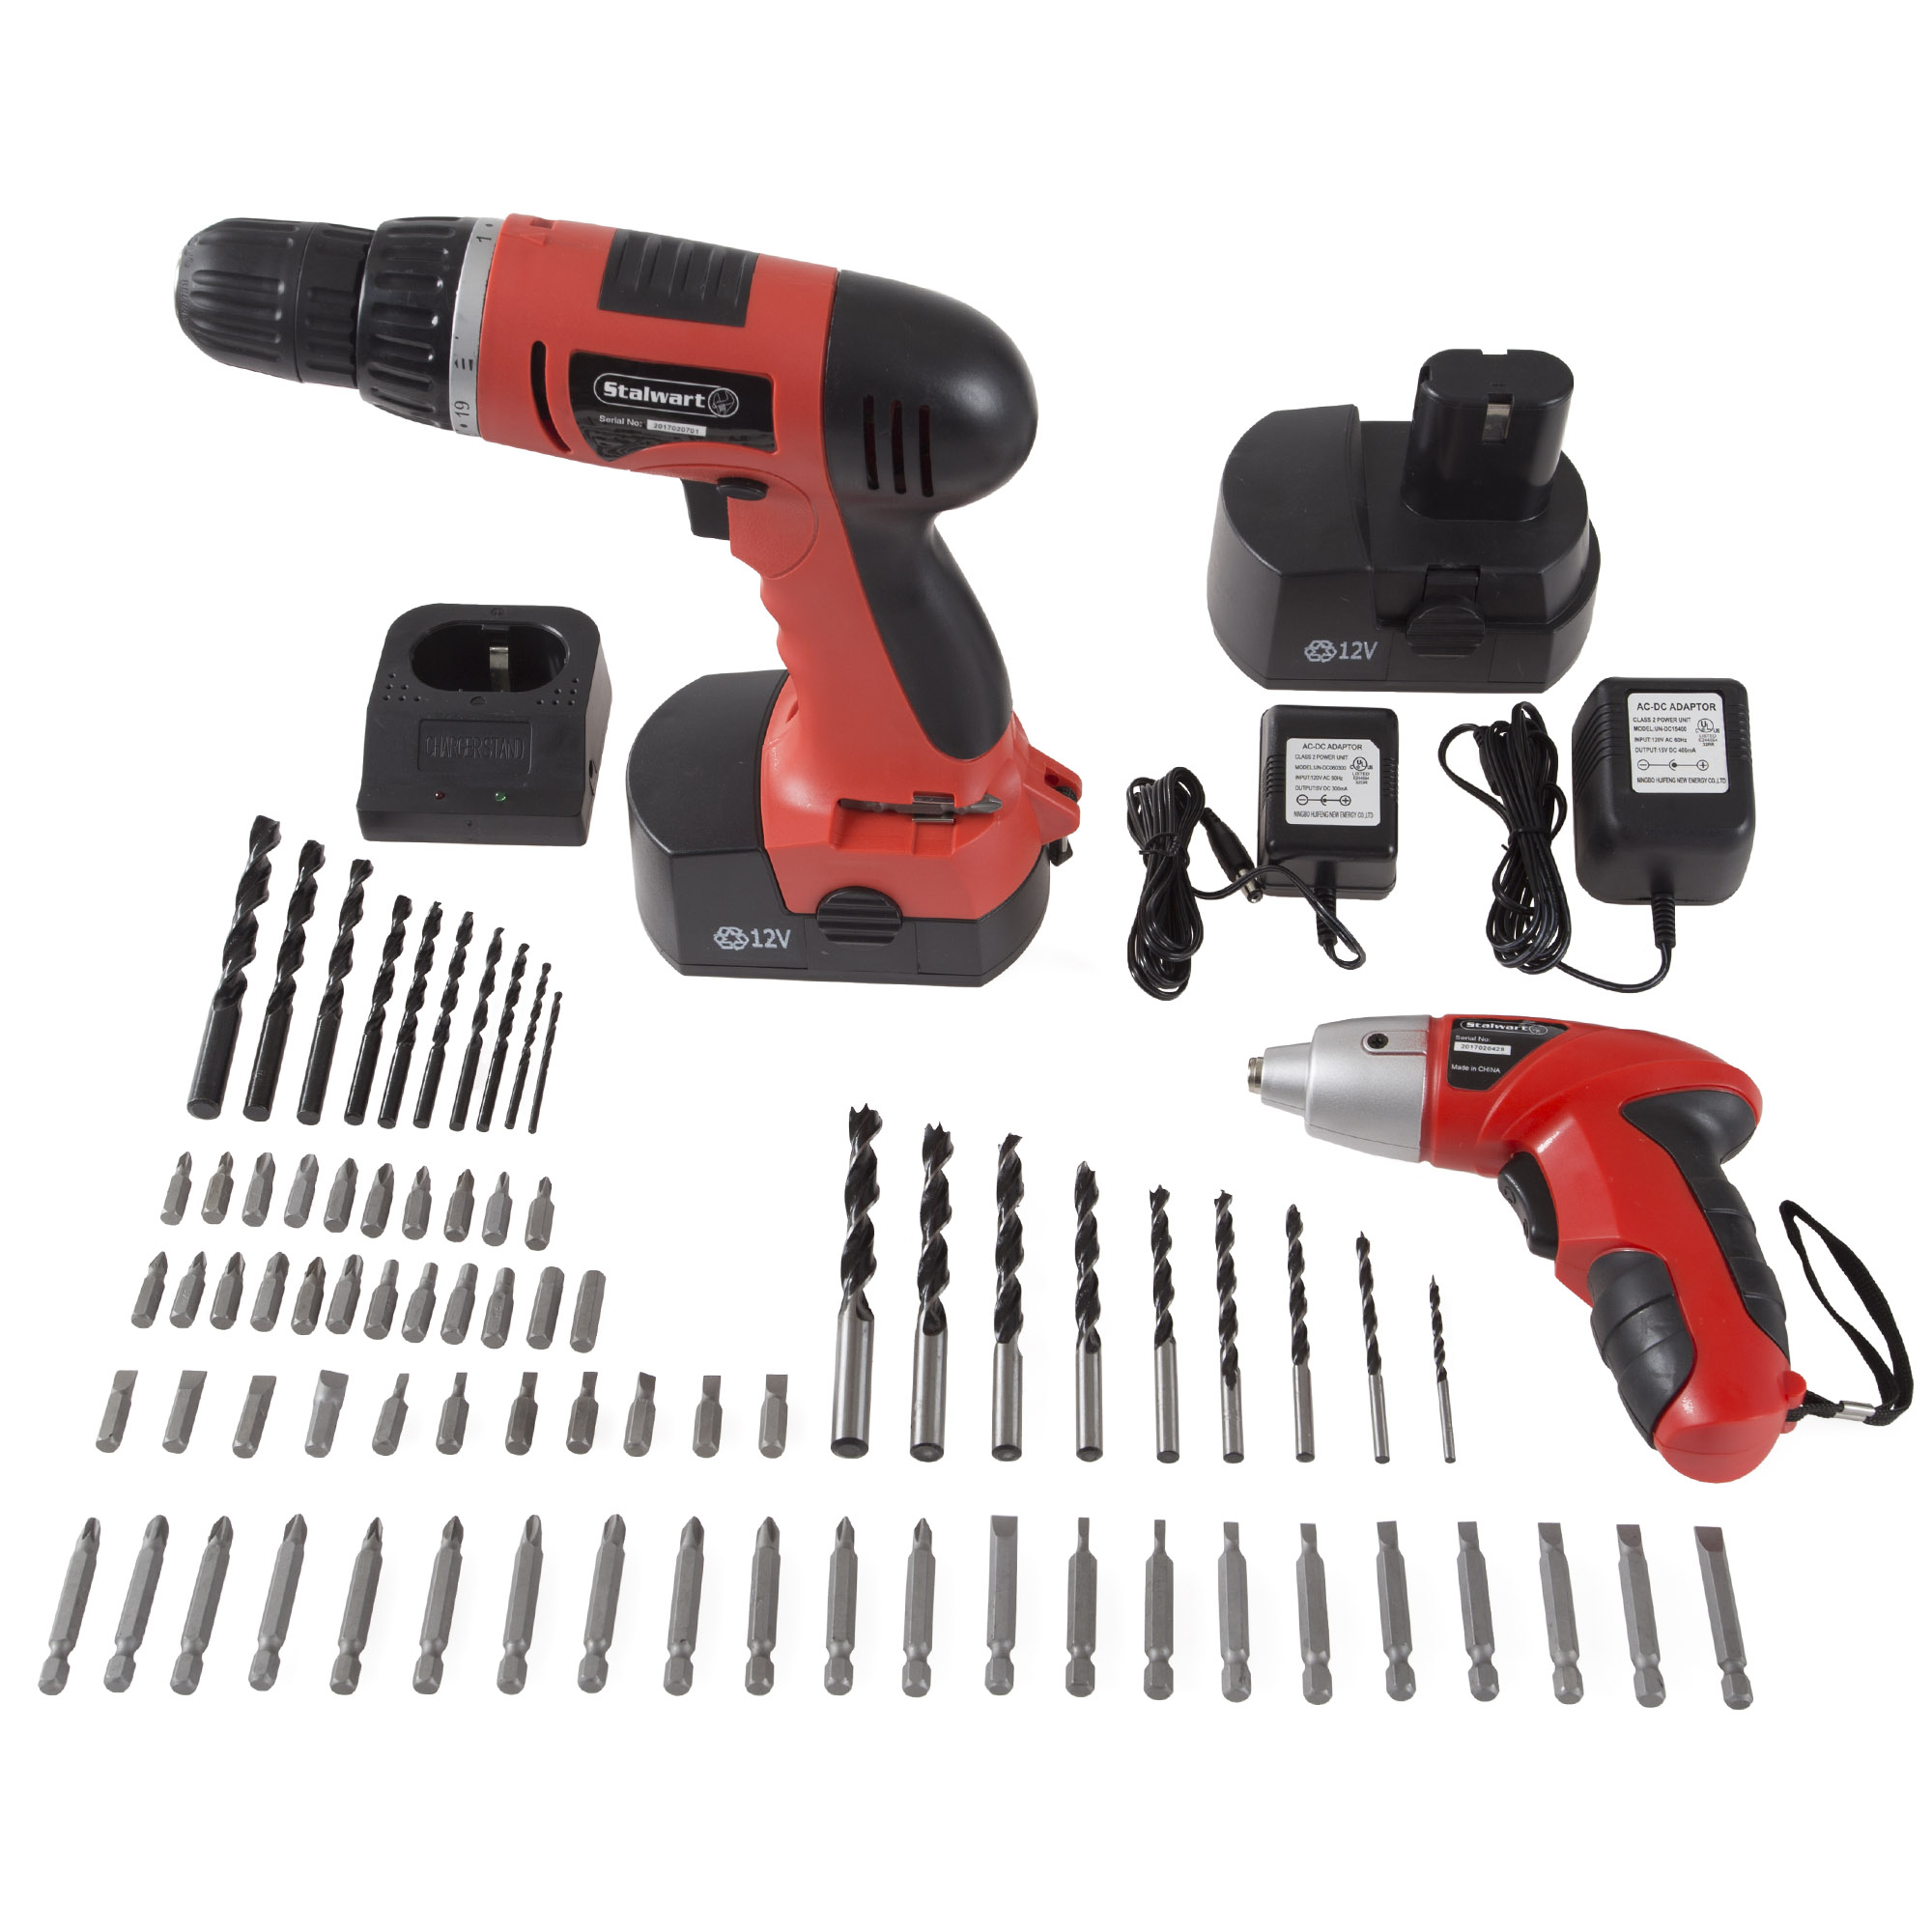 Stalwart 12-Volt Cordless Drill and 3.6-Volt Driver Tool Sets with 74-Piece Project Kit, W550005 - image 2 of 5